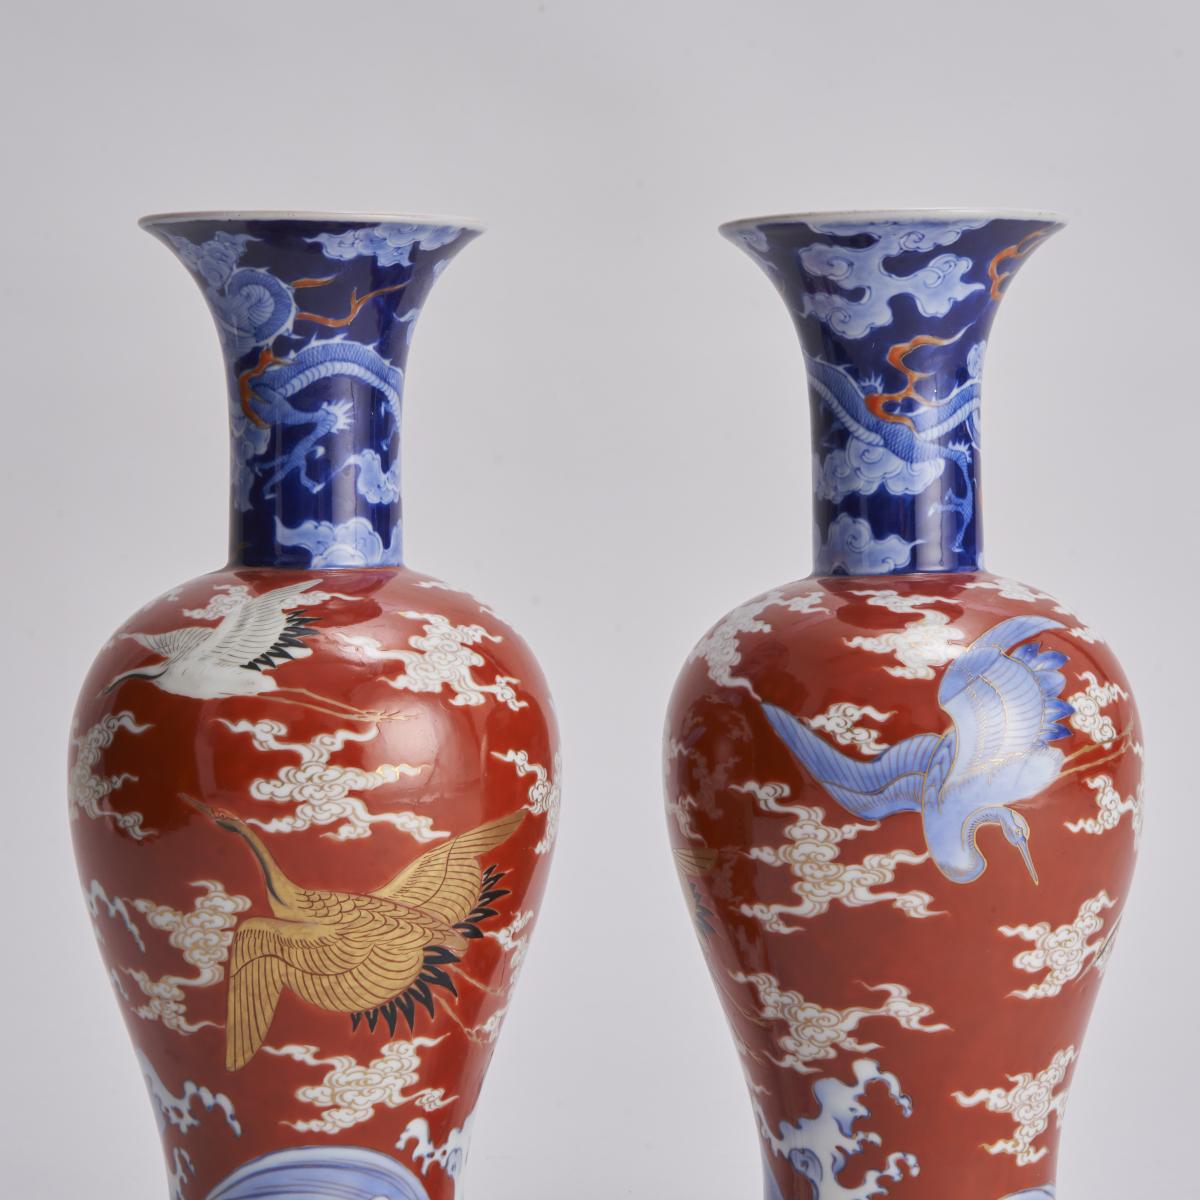 An attractive pair of Japanese, 19th Century Fukagawa porcelain vases